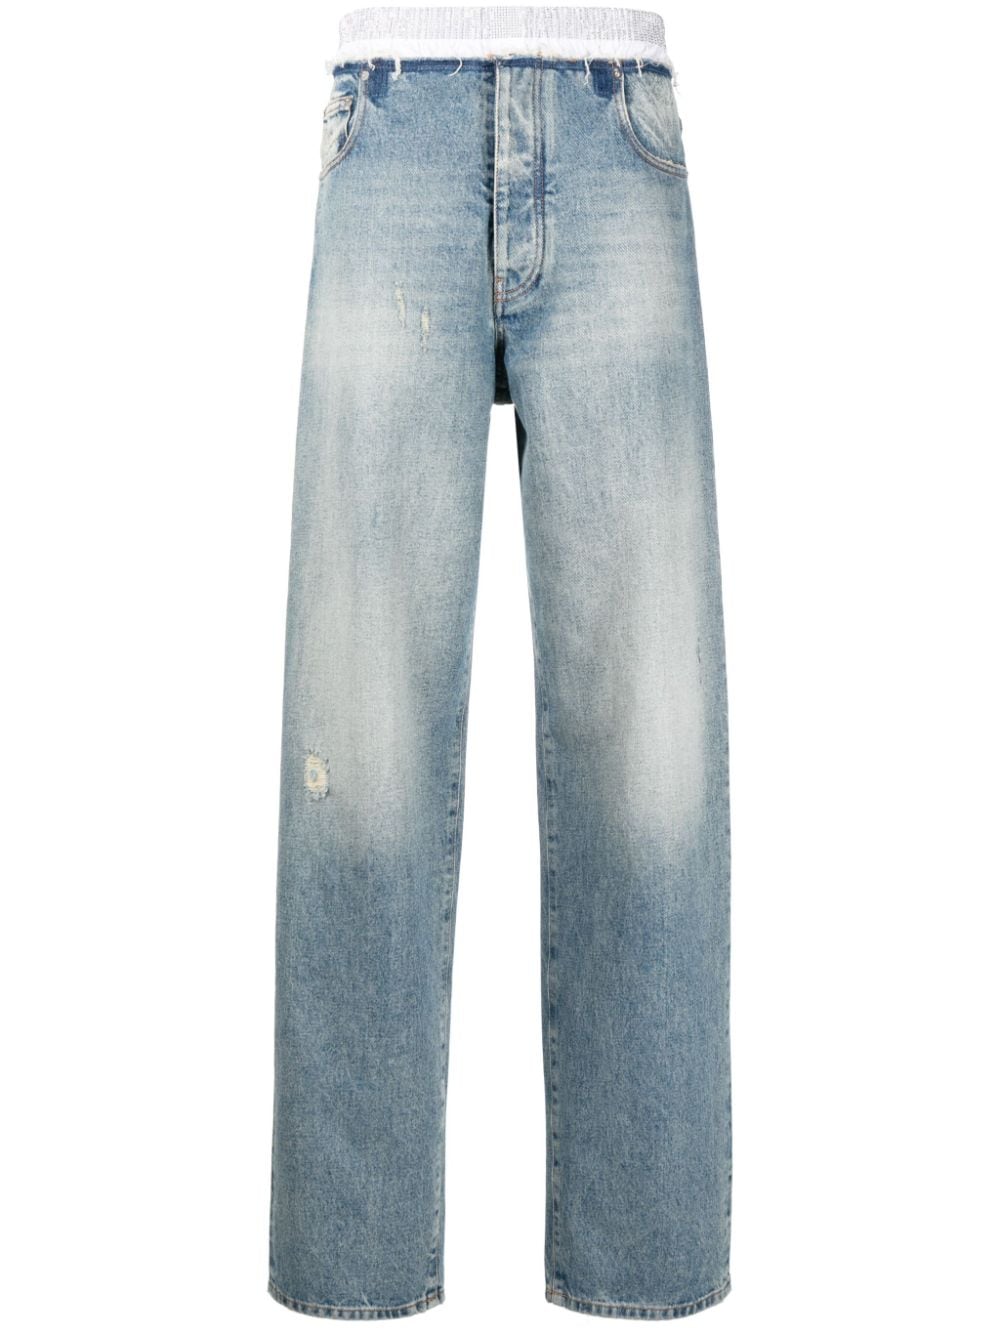 Image 1 of DARKPARK Claire panelled jeans